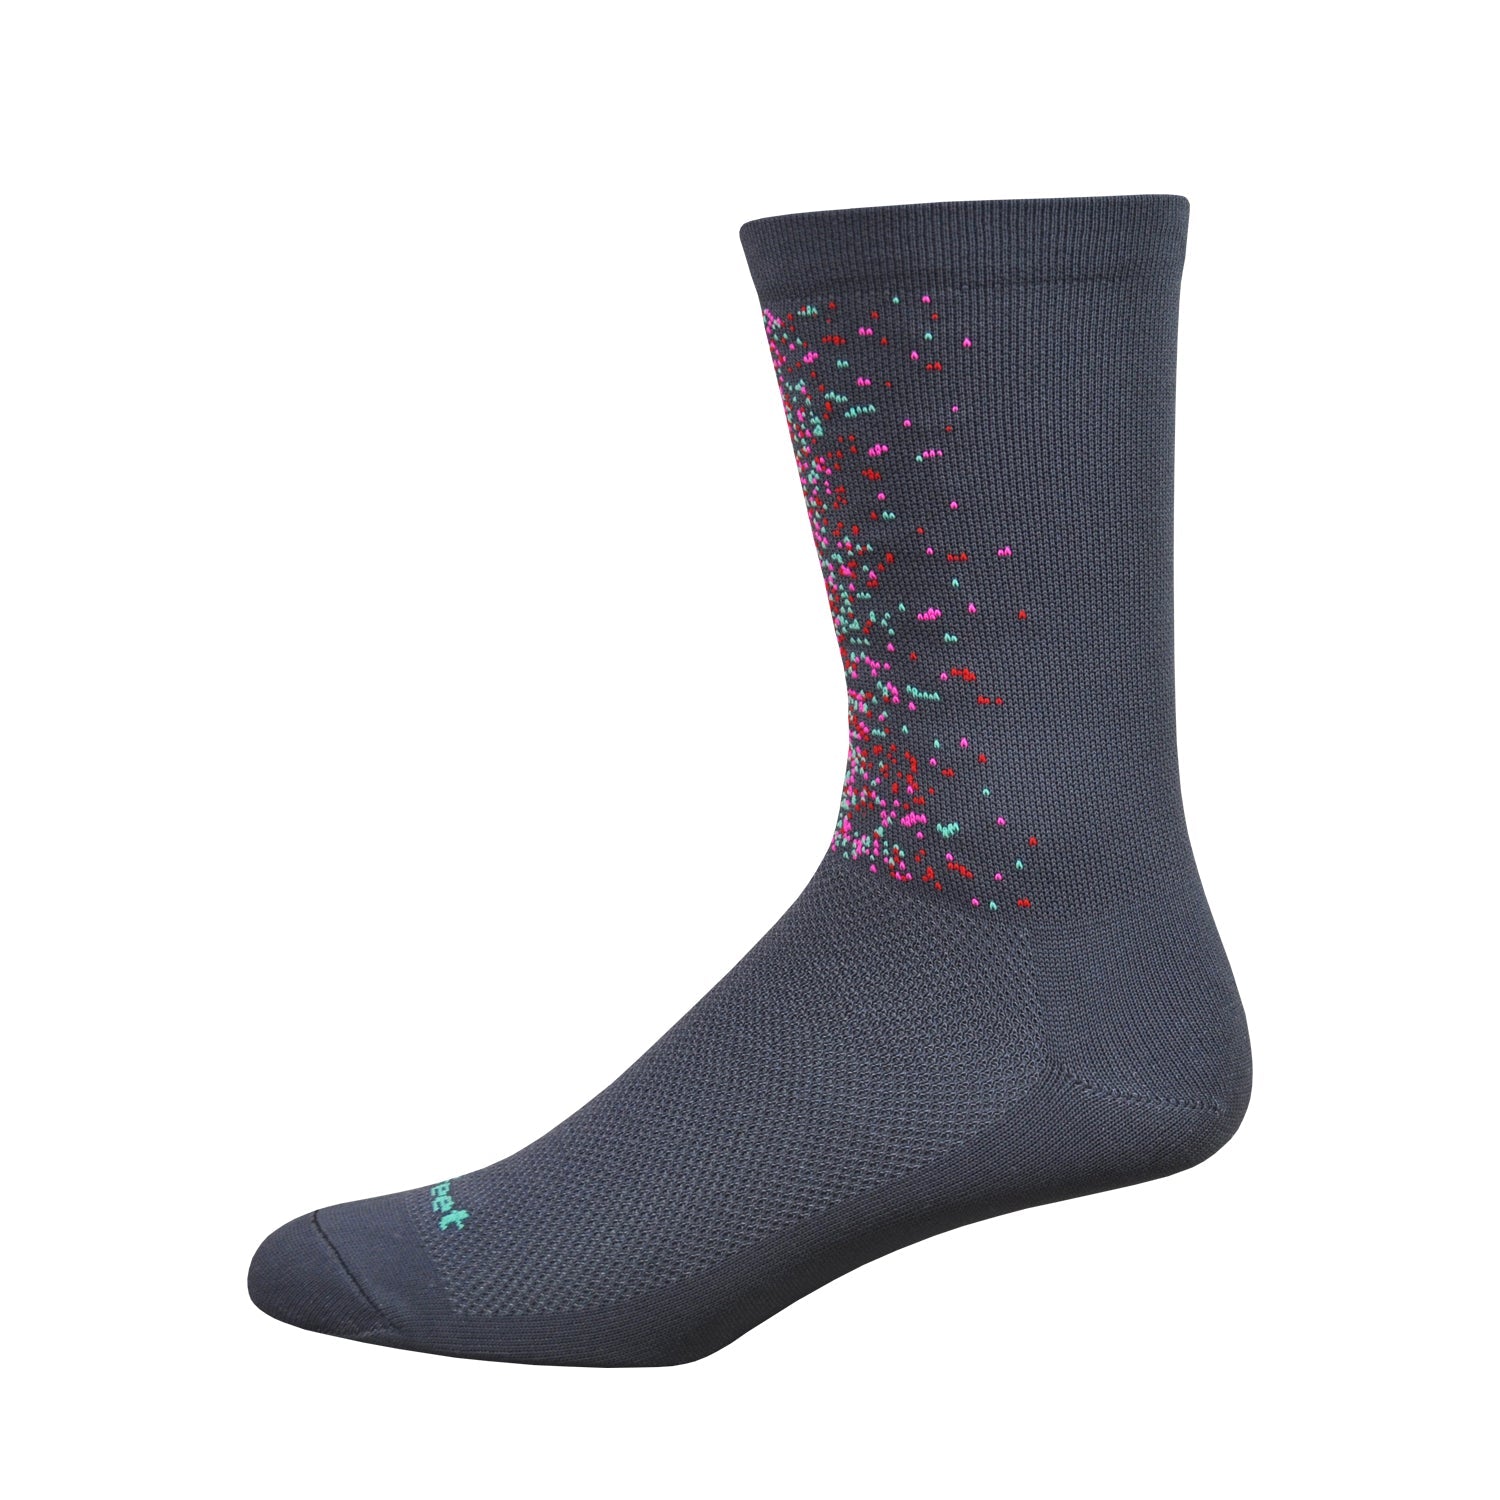 dark grey cycling sock with colored splatter on the front of the cuff